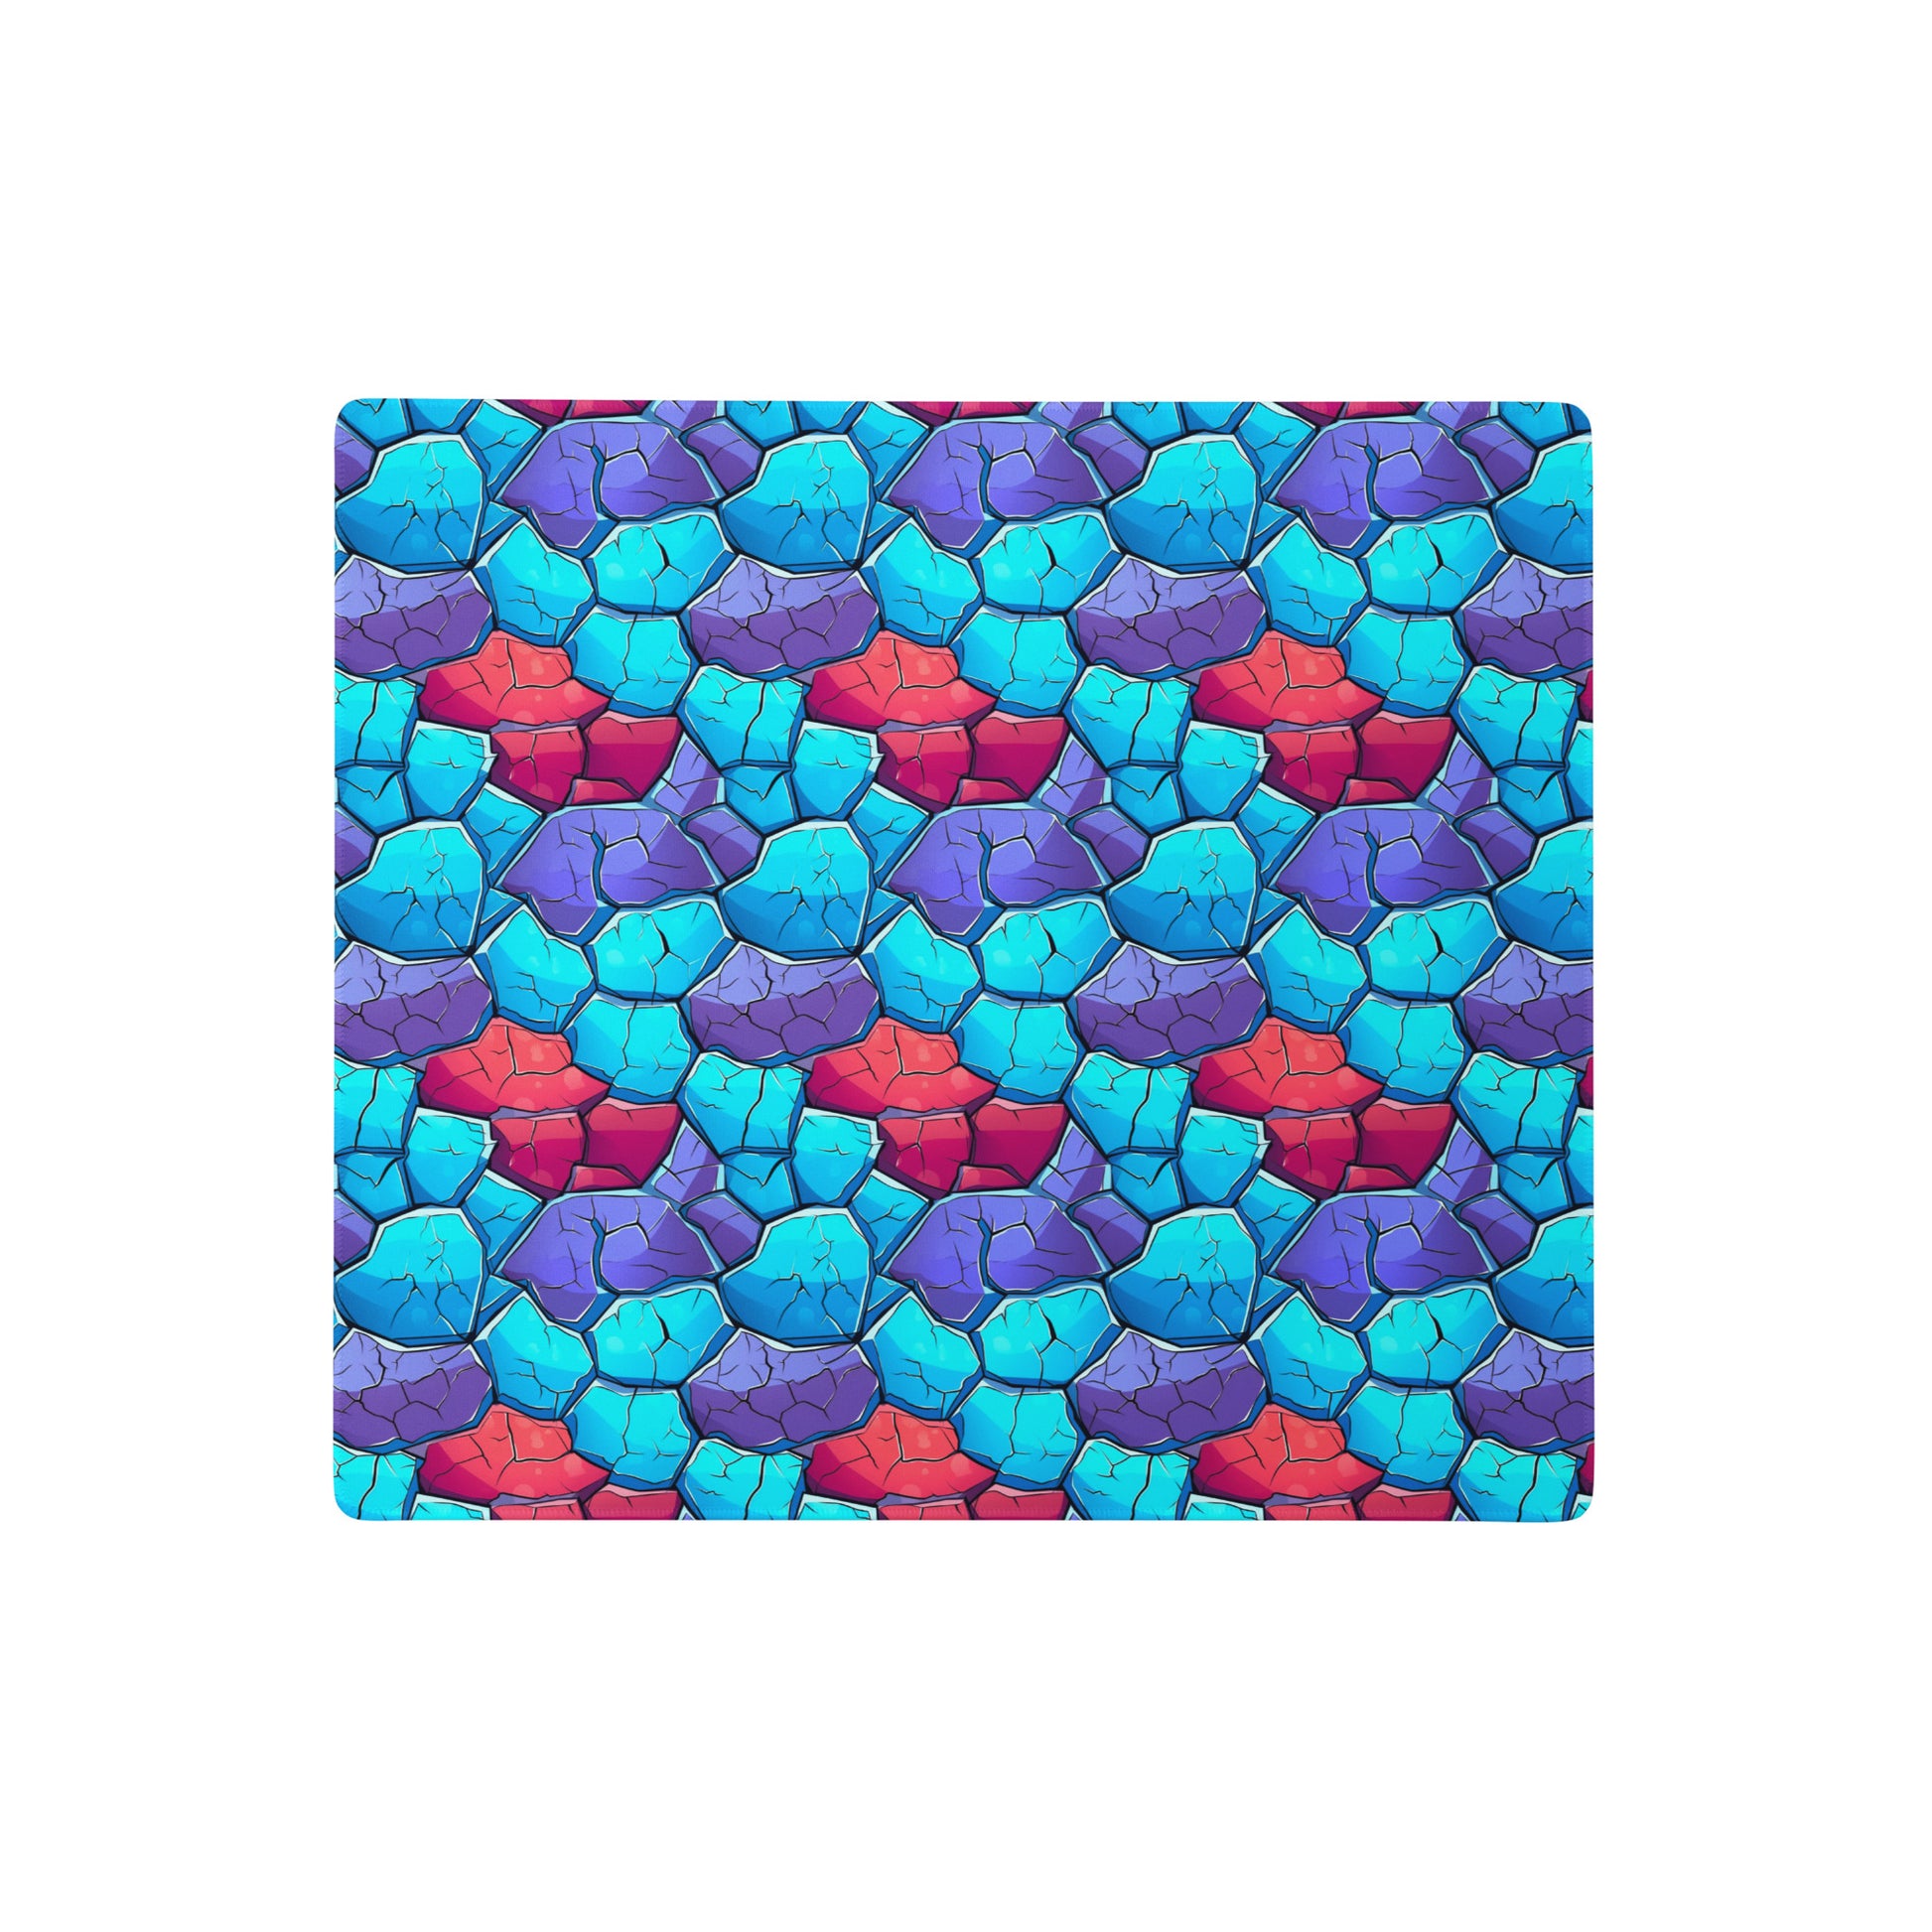 An 18" x 16" gaming desk pad with blue, red, and purple crystals.